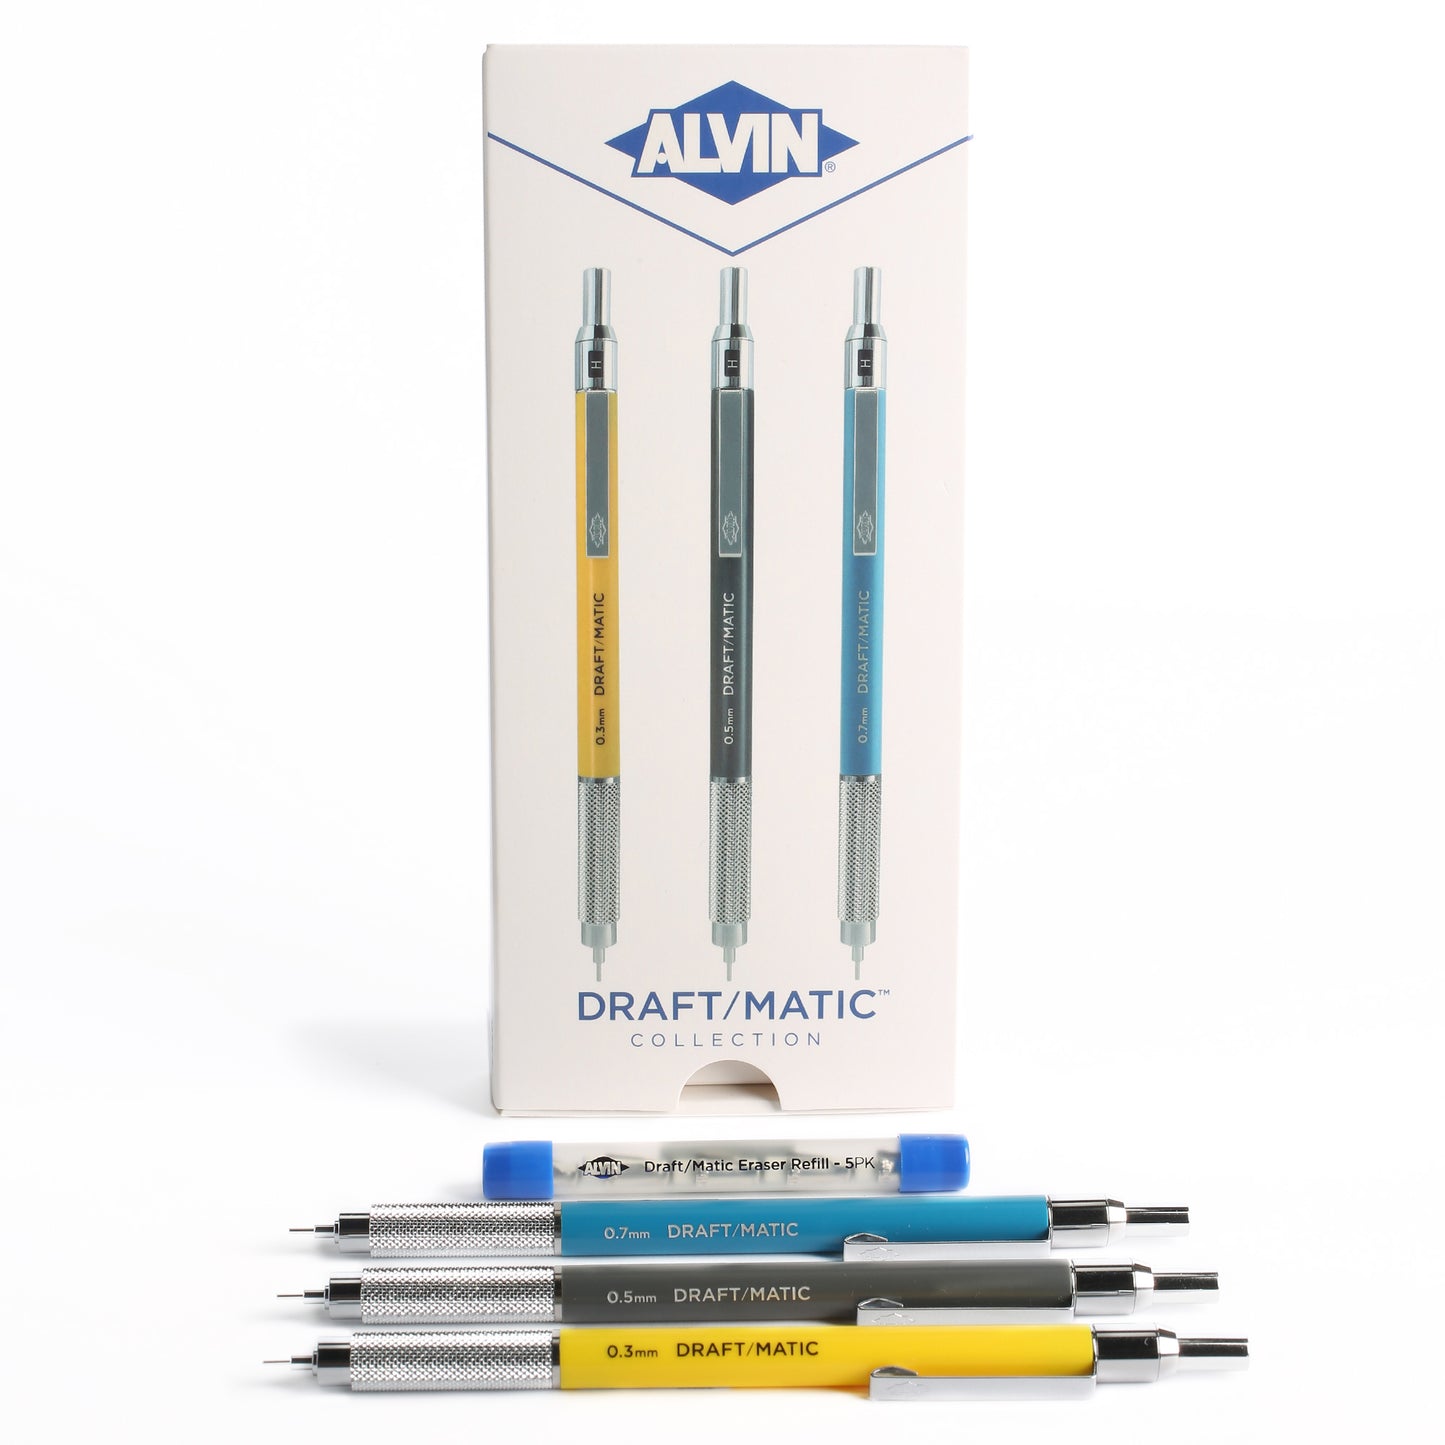 Draft/Matic Pencil Collection Set of 3